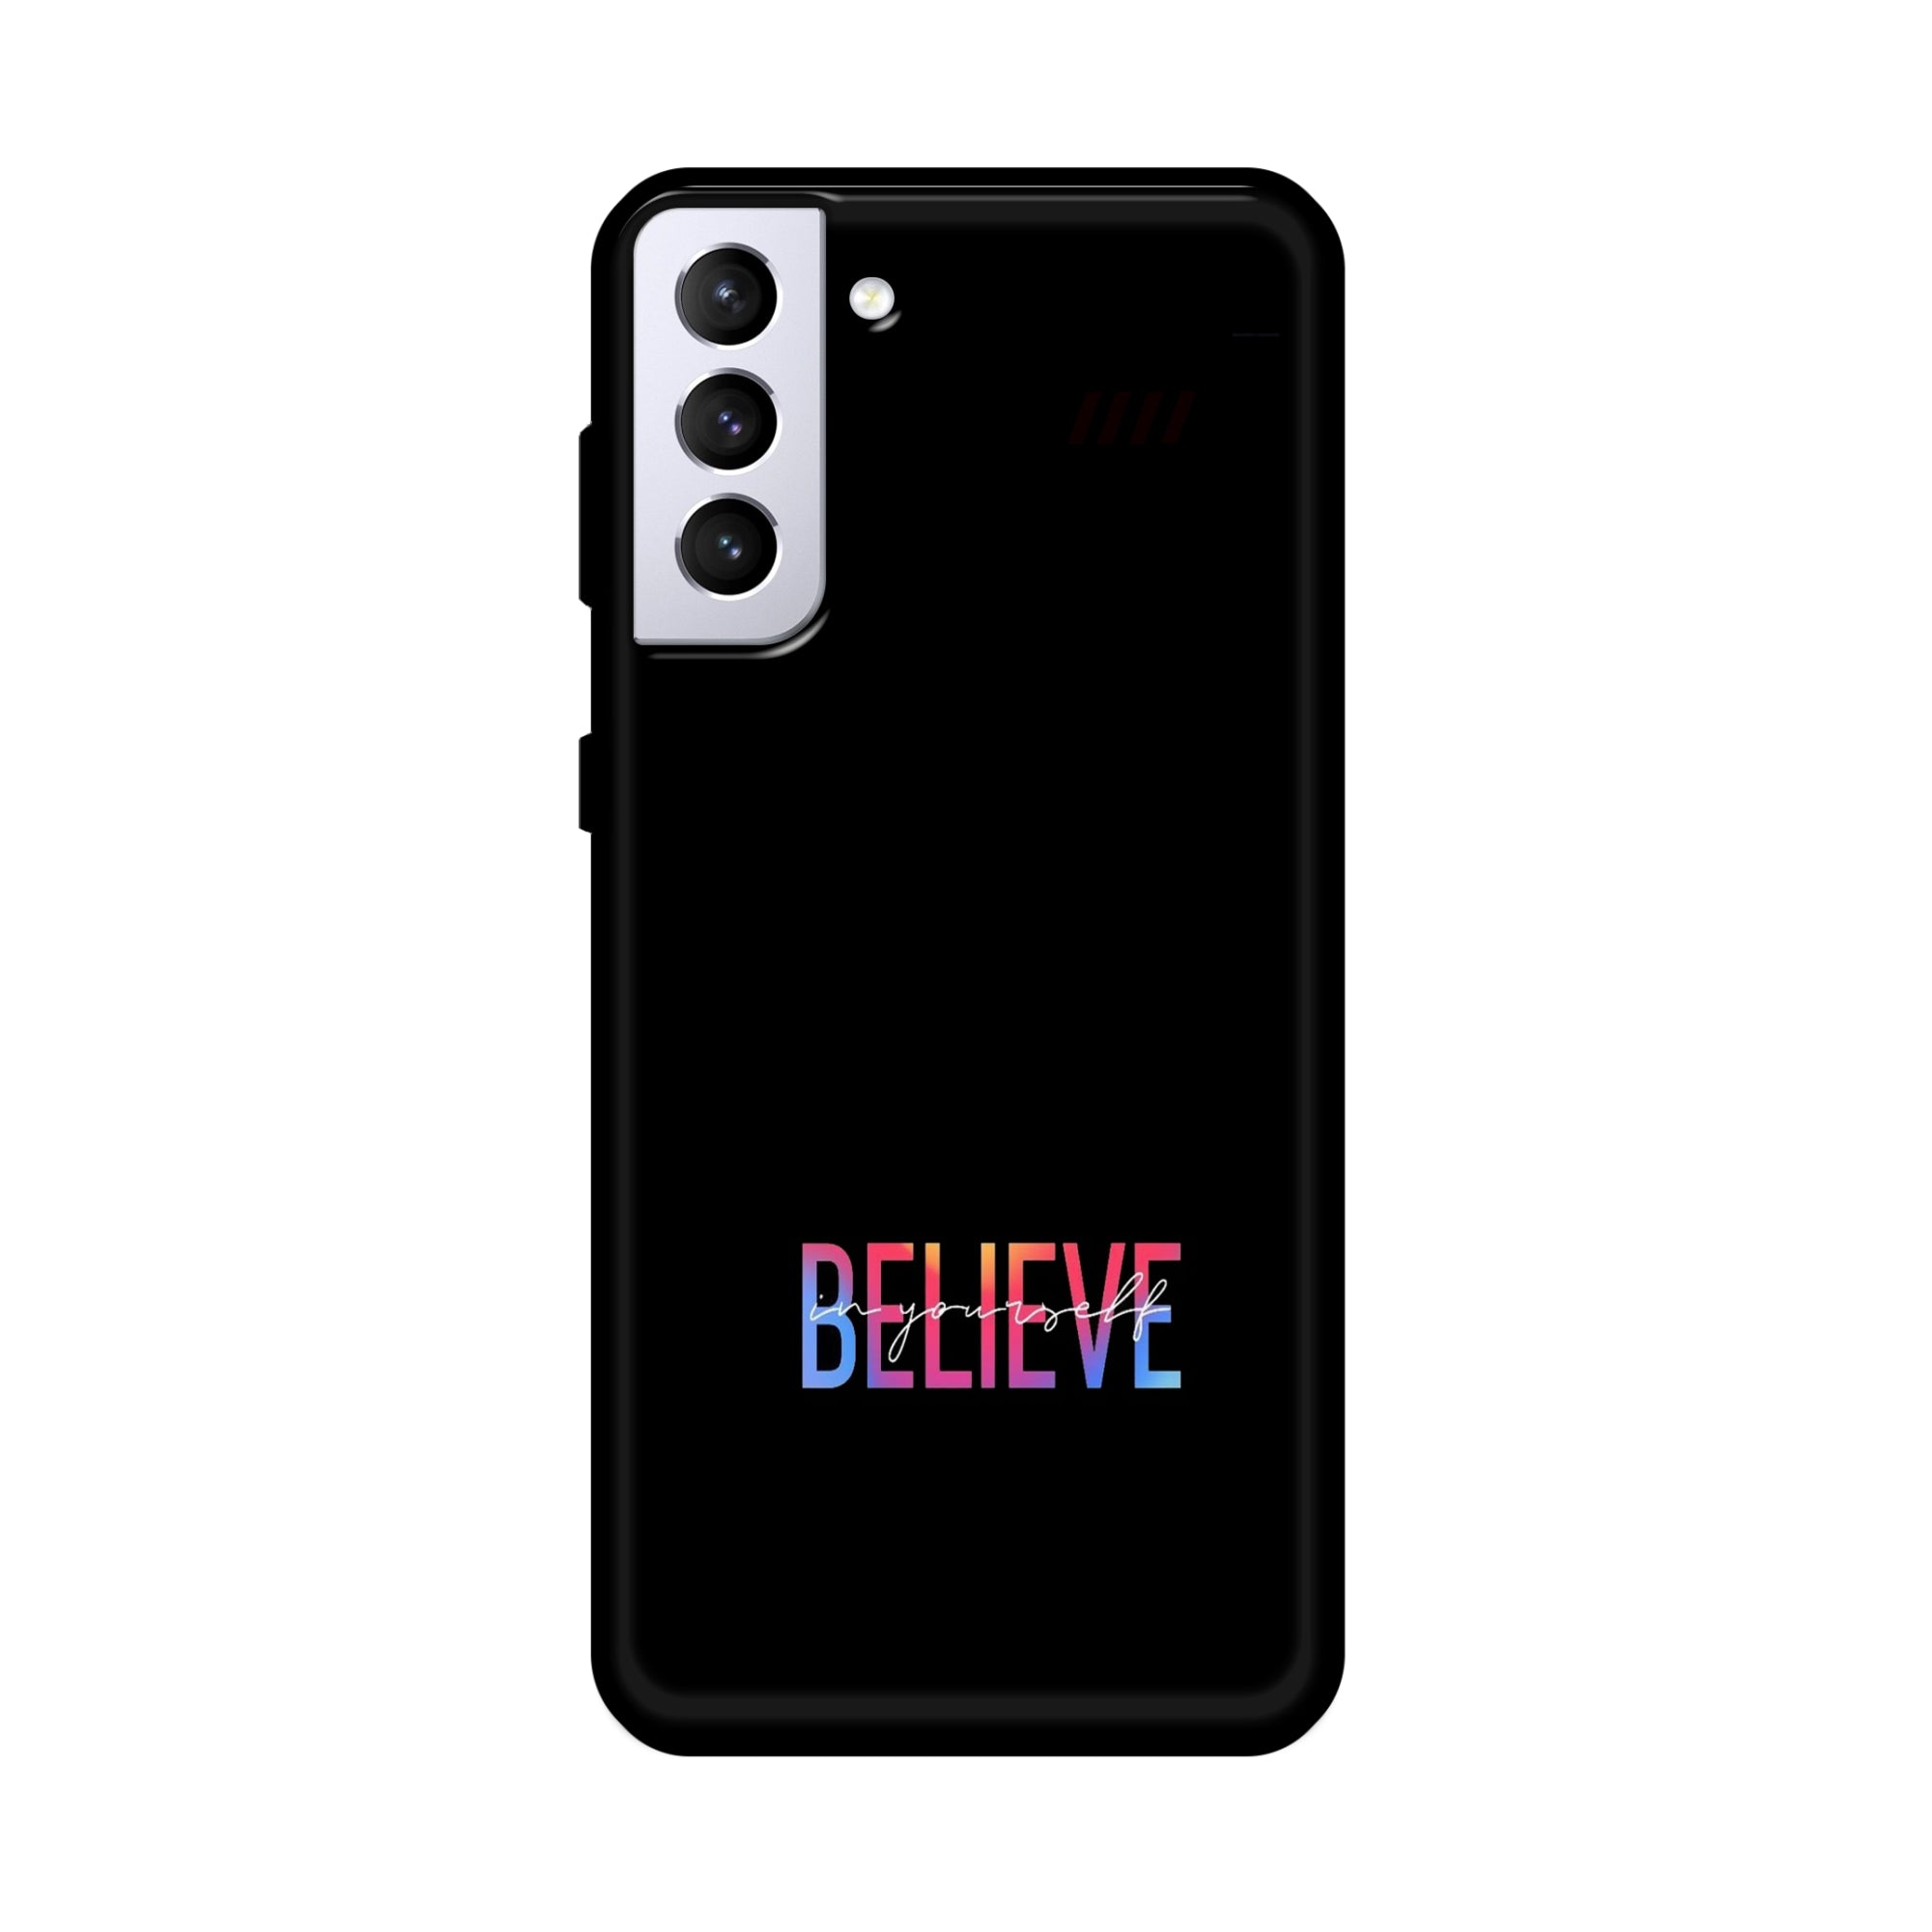 Buy Believe Metal-Silicon Back Mobile Phone Case/Cover For Samsung Galaxy S21 Online